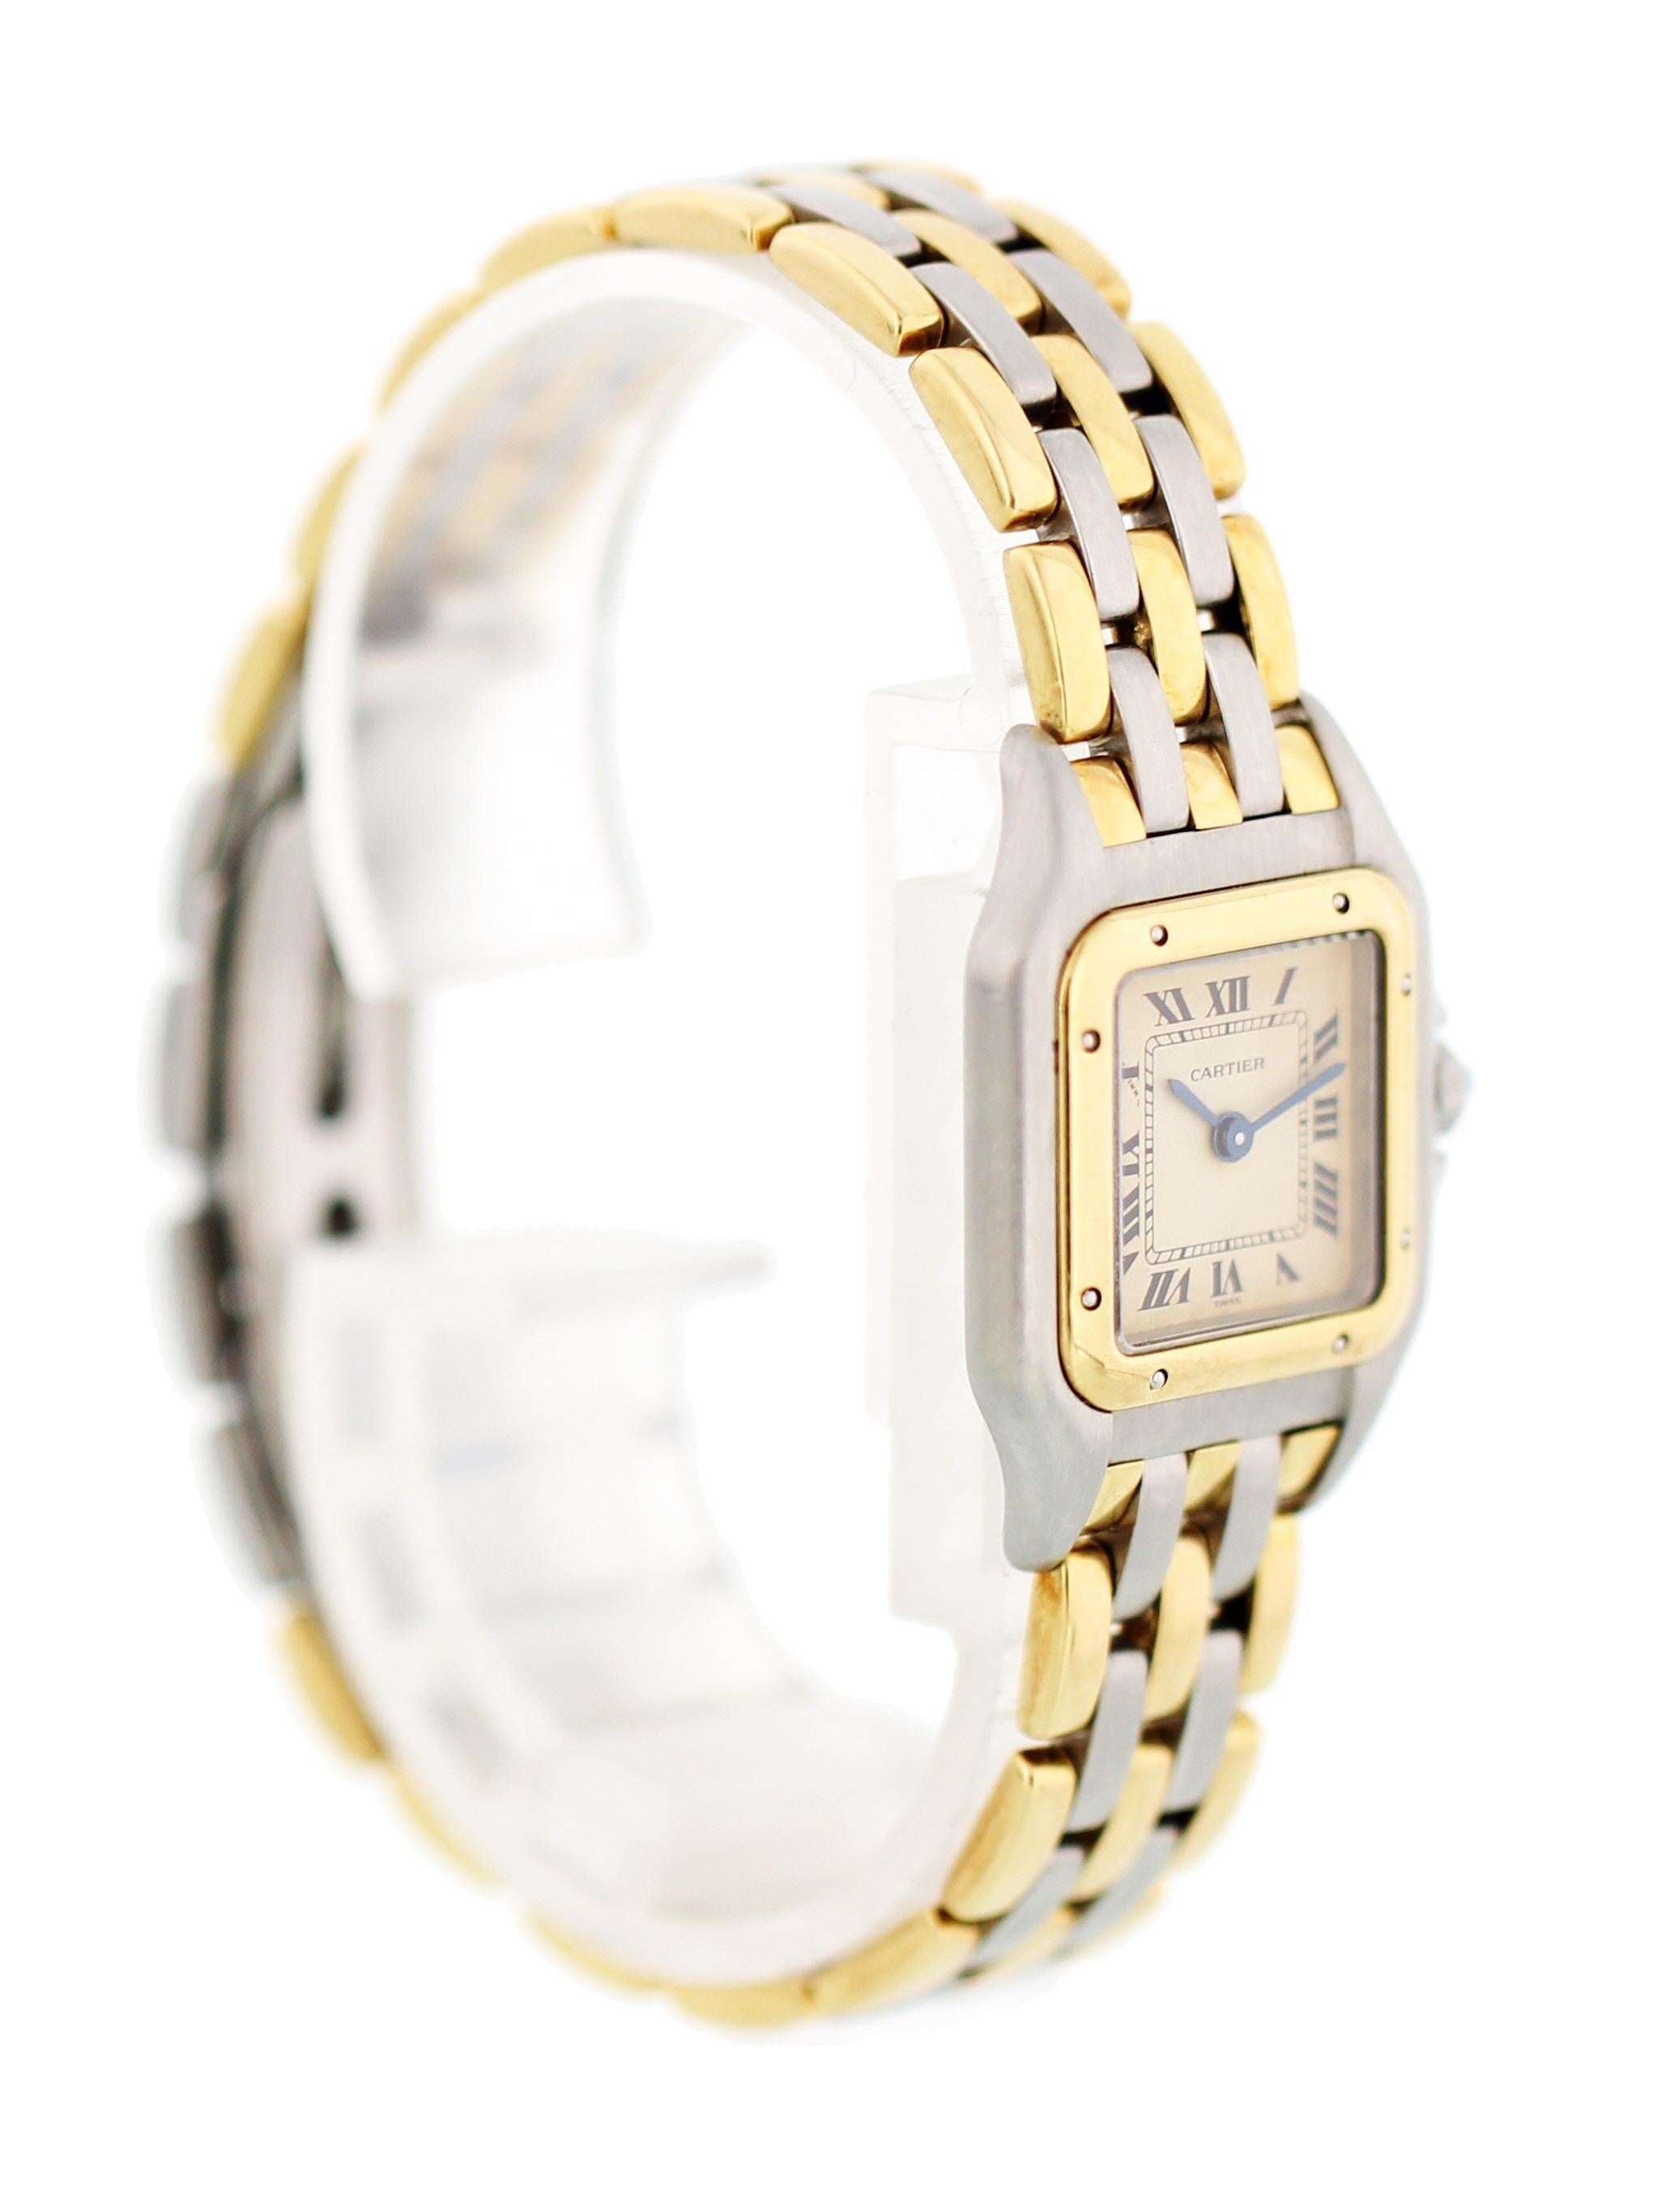 Cartier Panthere 112000. Stainless steel 22 mm case. 18k yellow gold bezel. Off White dial with blue hands and black roman numeral markers. Two tone band with three rows of gold links. Will fit up to a 6 inch wrist. Quartz battery movement. Sapphire